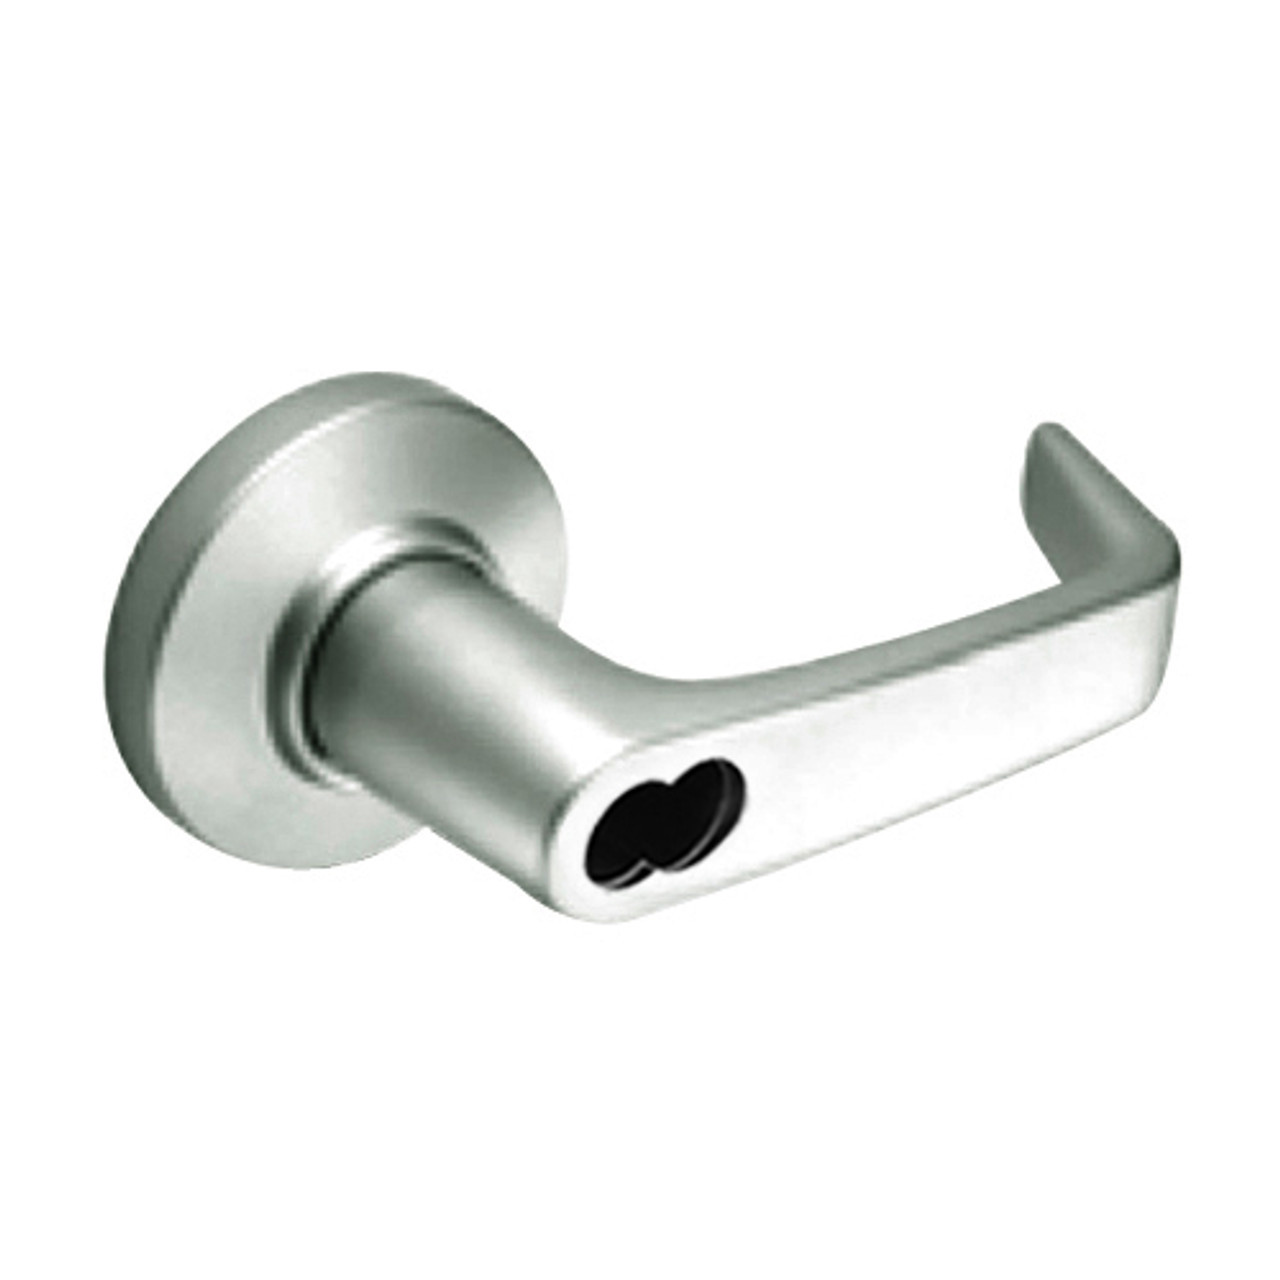 9K57A15CSTK619LM Best 9K Series Dormitory or Storeroom Cylindrical Lever Locks with Contour Angle with Return Lever Design Accept 7 Pin Best Core in Satin Nickel